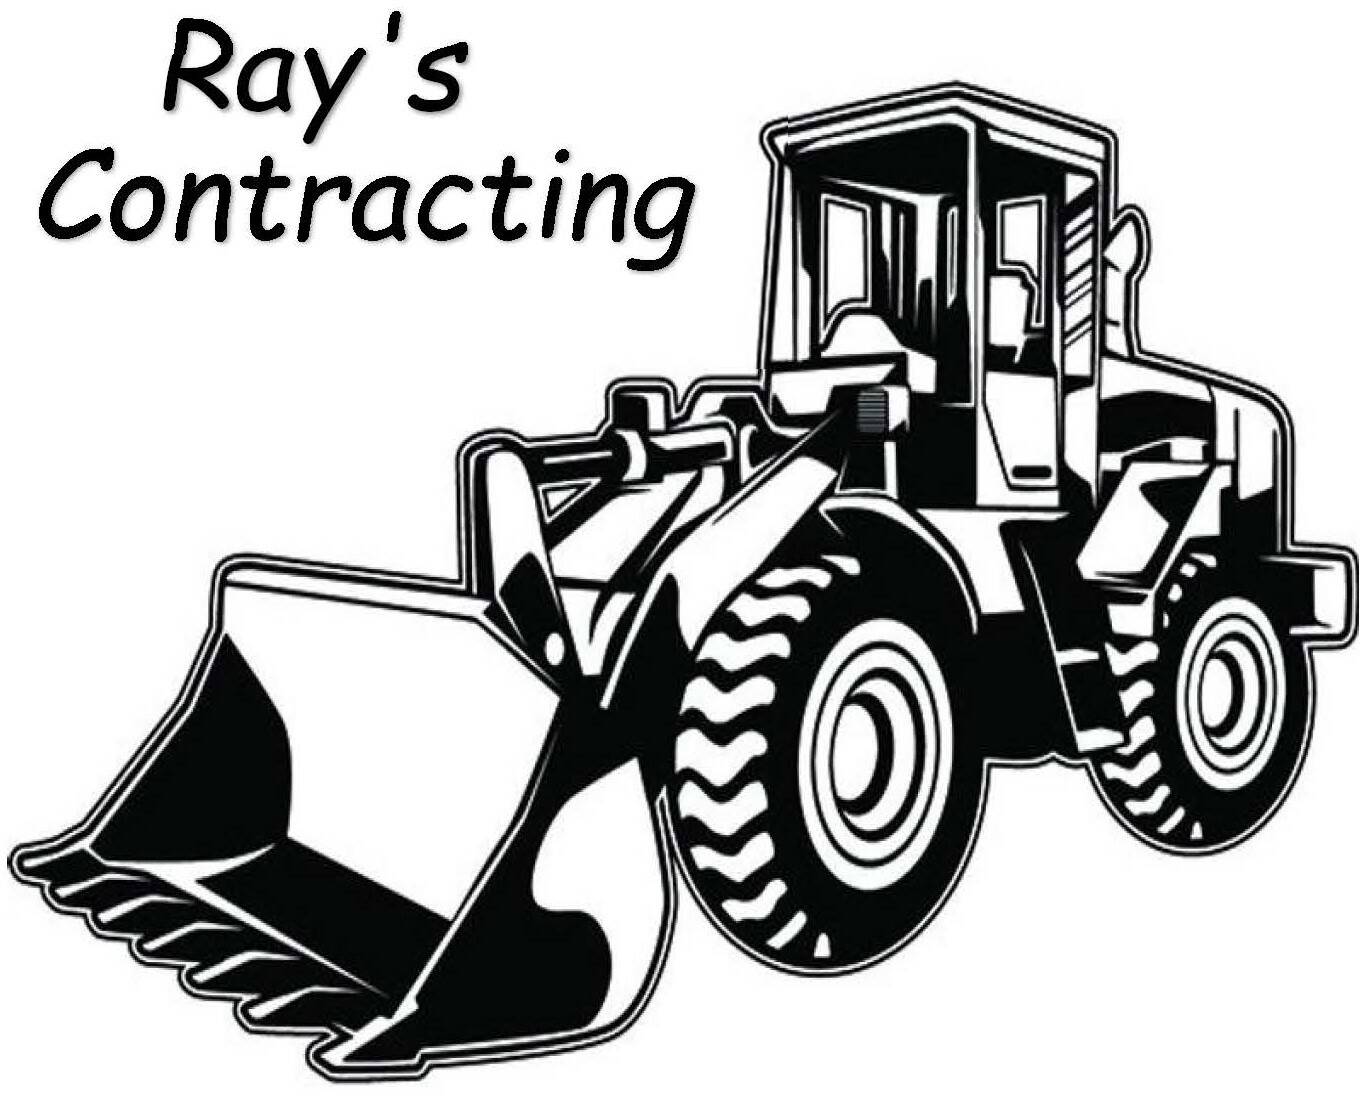 Ray's Contracting